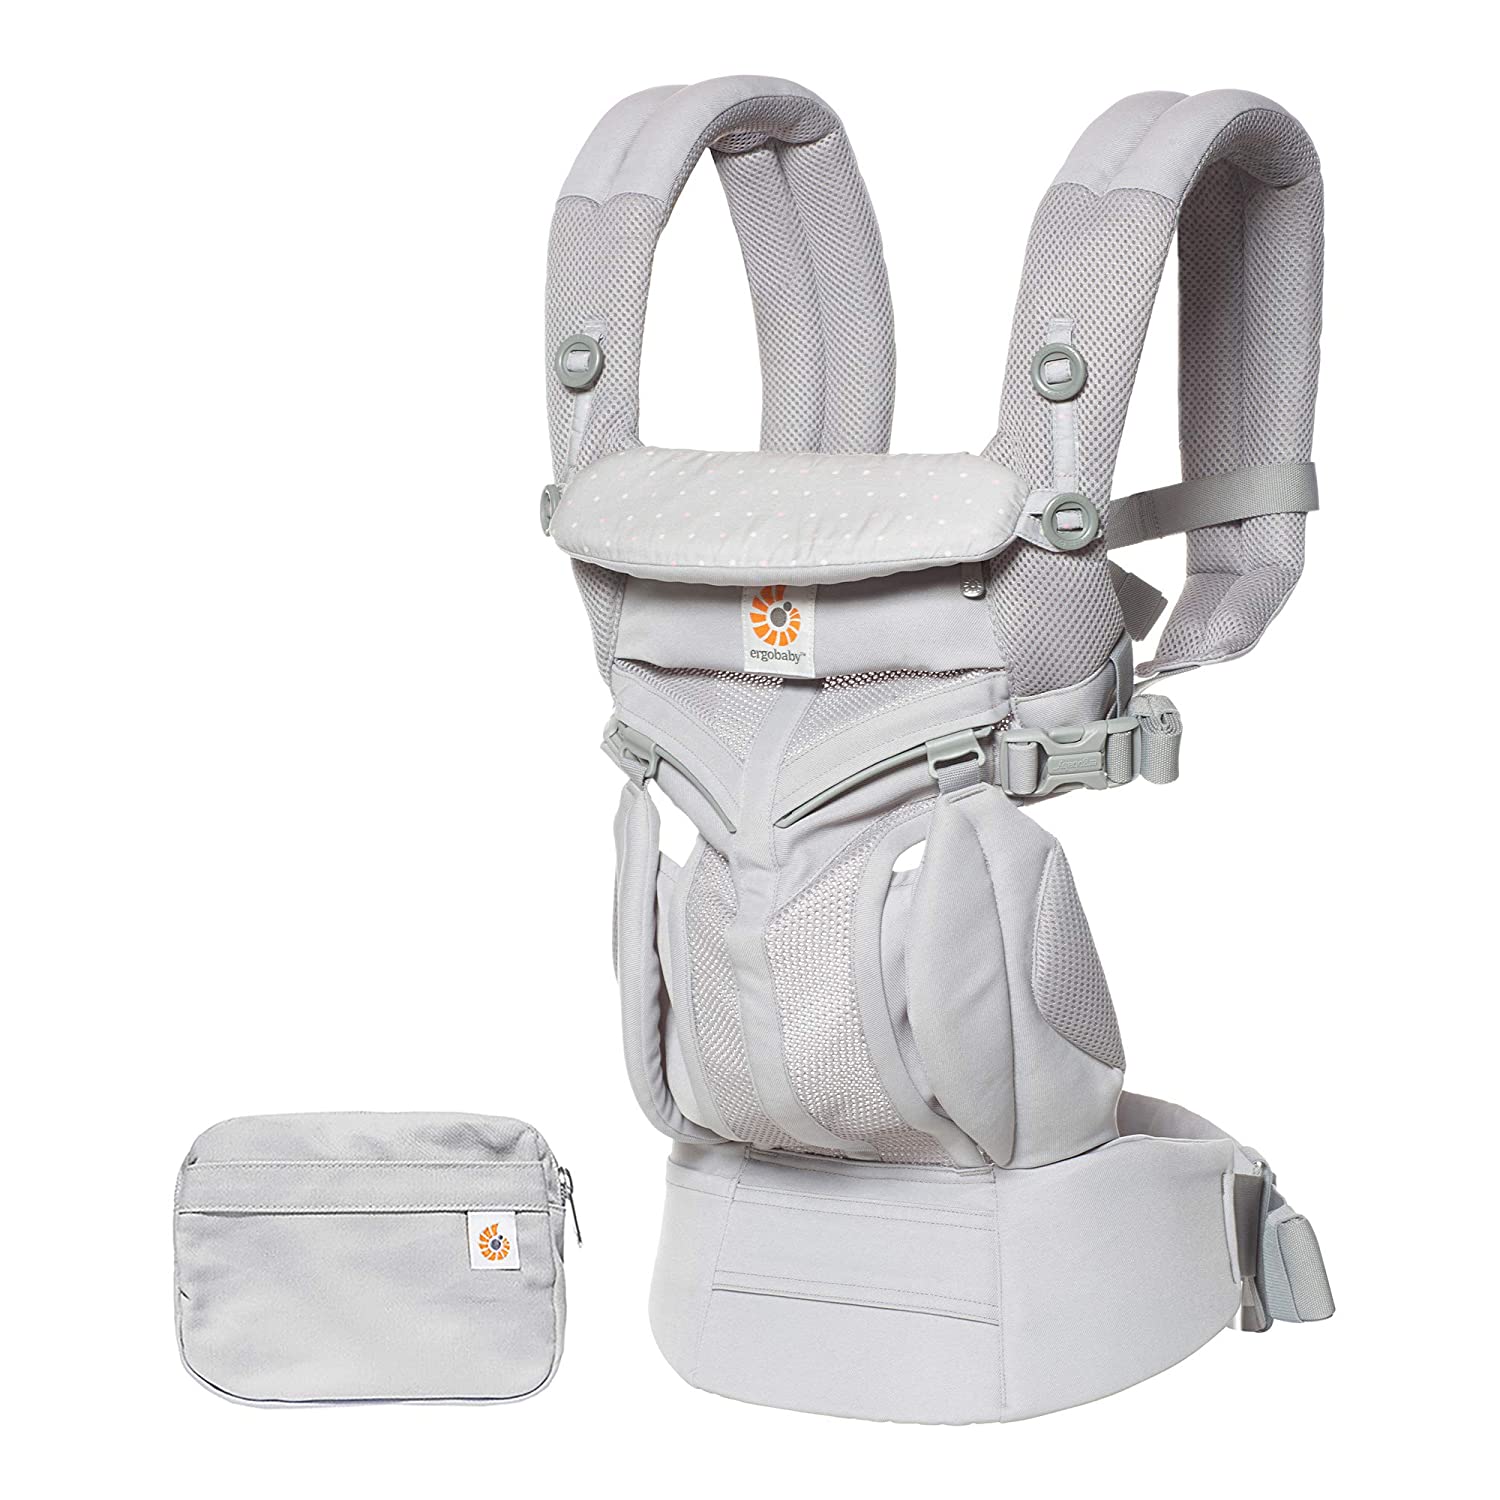 Ergobaby baby carrier for newborns from birth up to 20 kg, 4-in-1 Omni 360 Cool Air Mesh child carrier carrier system, grey pink dots